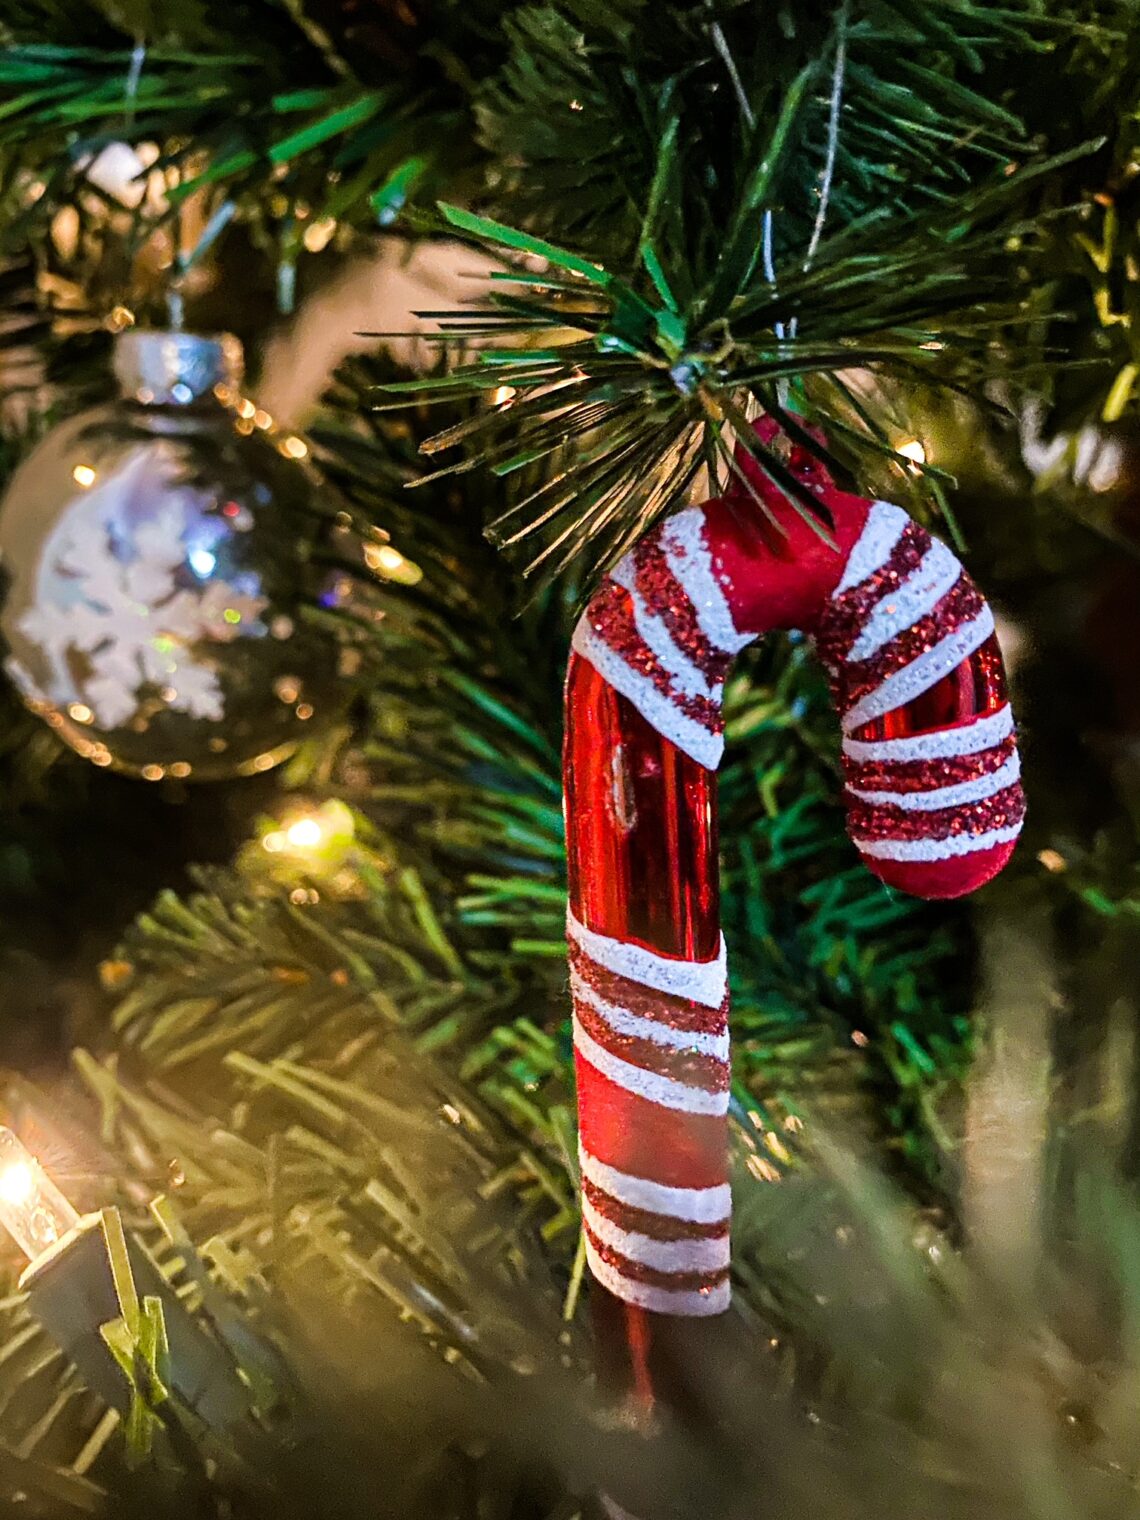 candy cane decoration hanging on Christmas tree